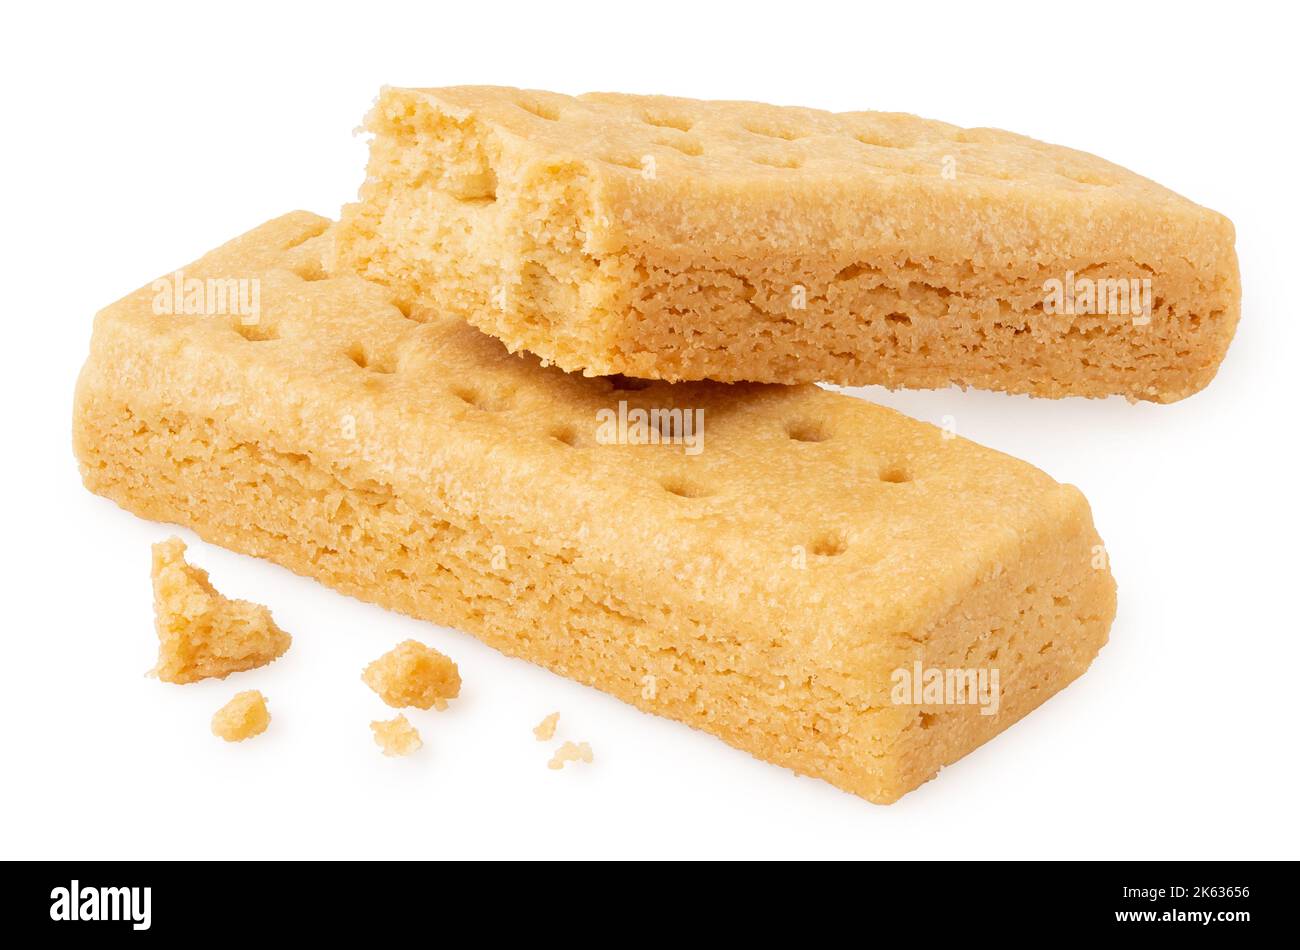 Two butter shortbread finger biscuits isolated on white. One partially eaten. Stock Photo